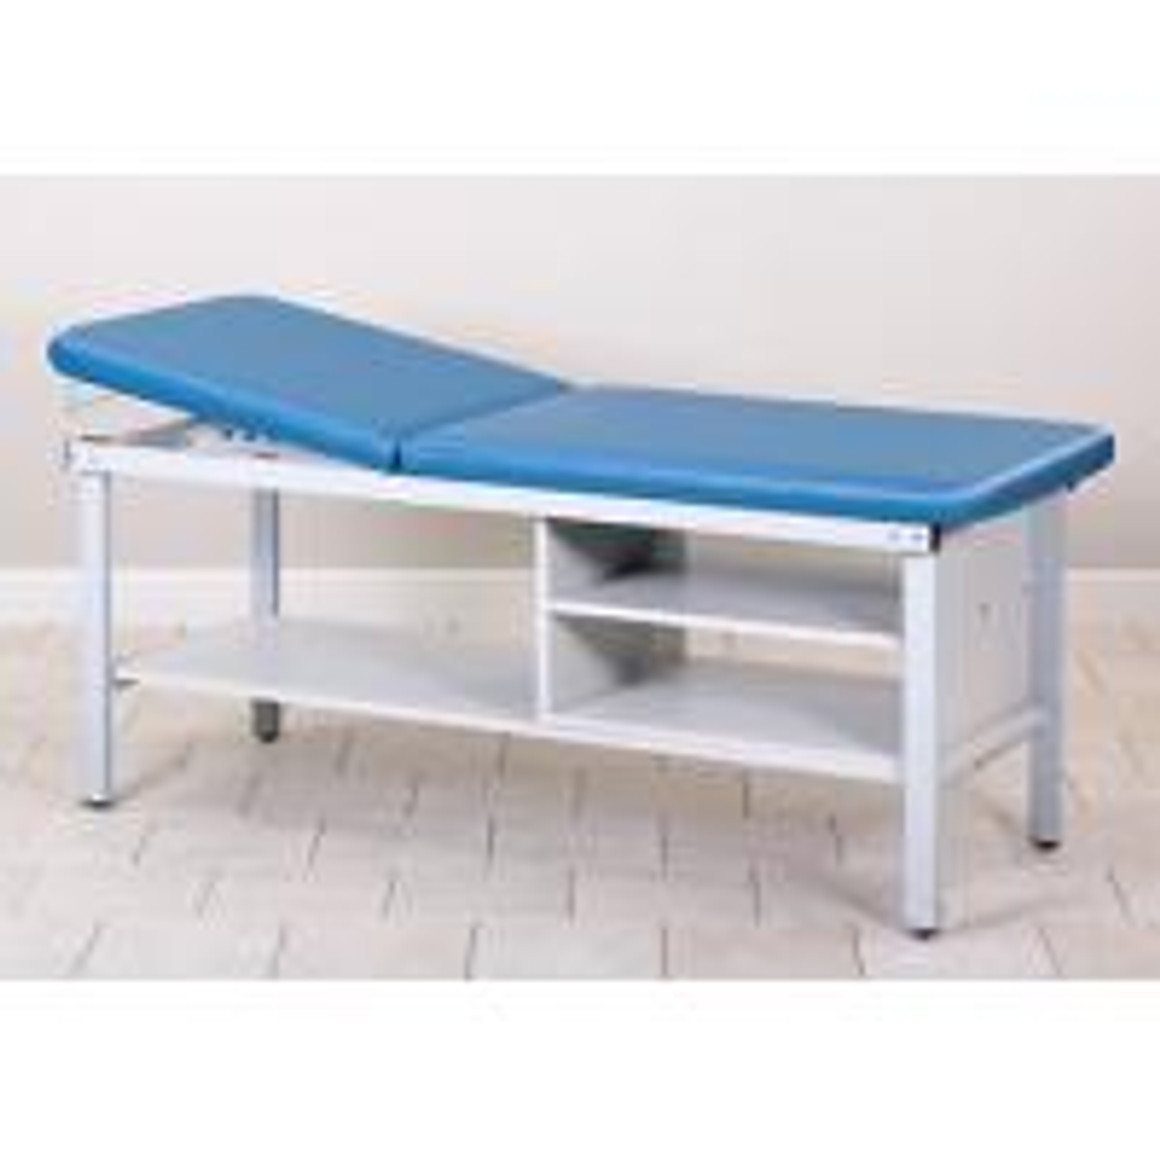 Clinton ETA Alpha Series Straight Line Treatment Table with Shelving Unit, 27" Wide, China Green